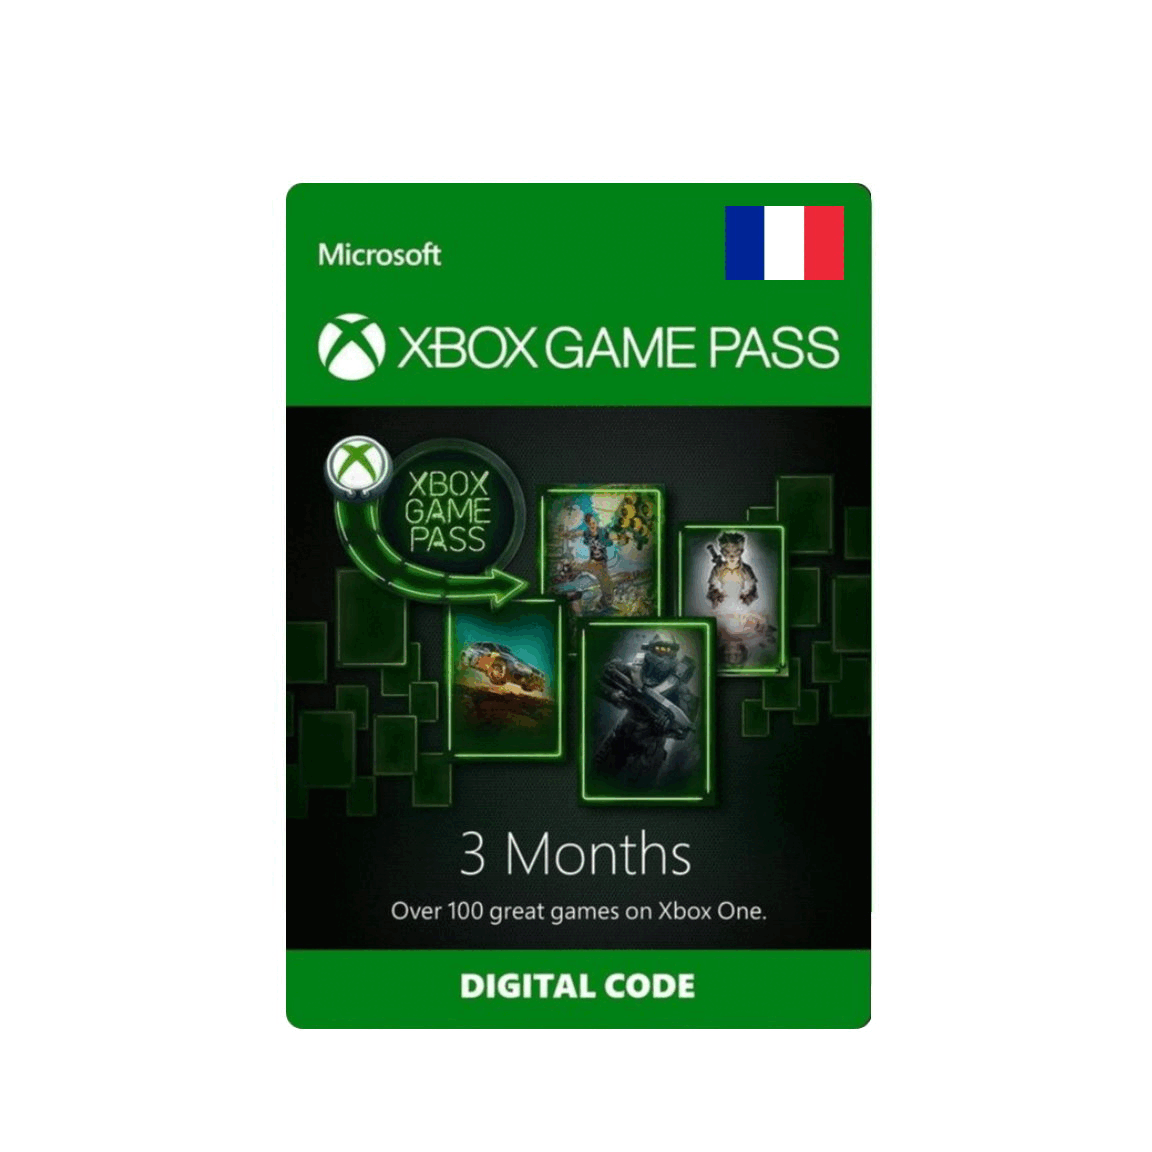 Xbox Game Pass Card - France (FR)